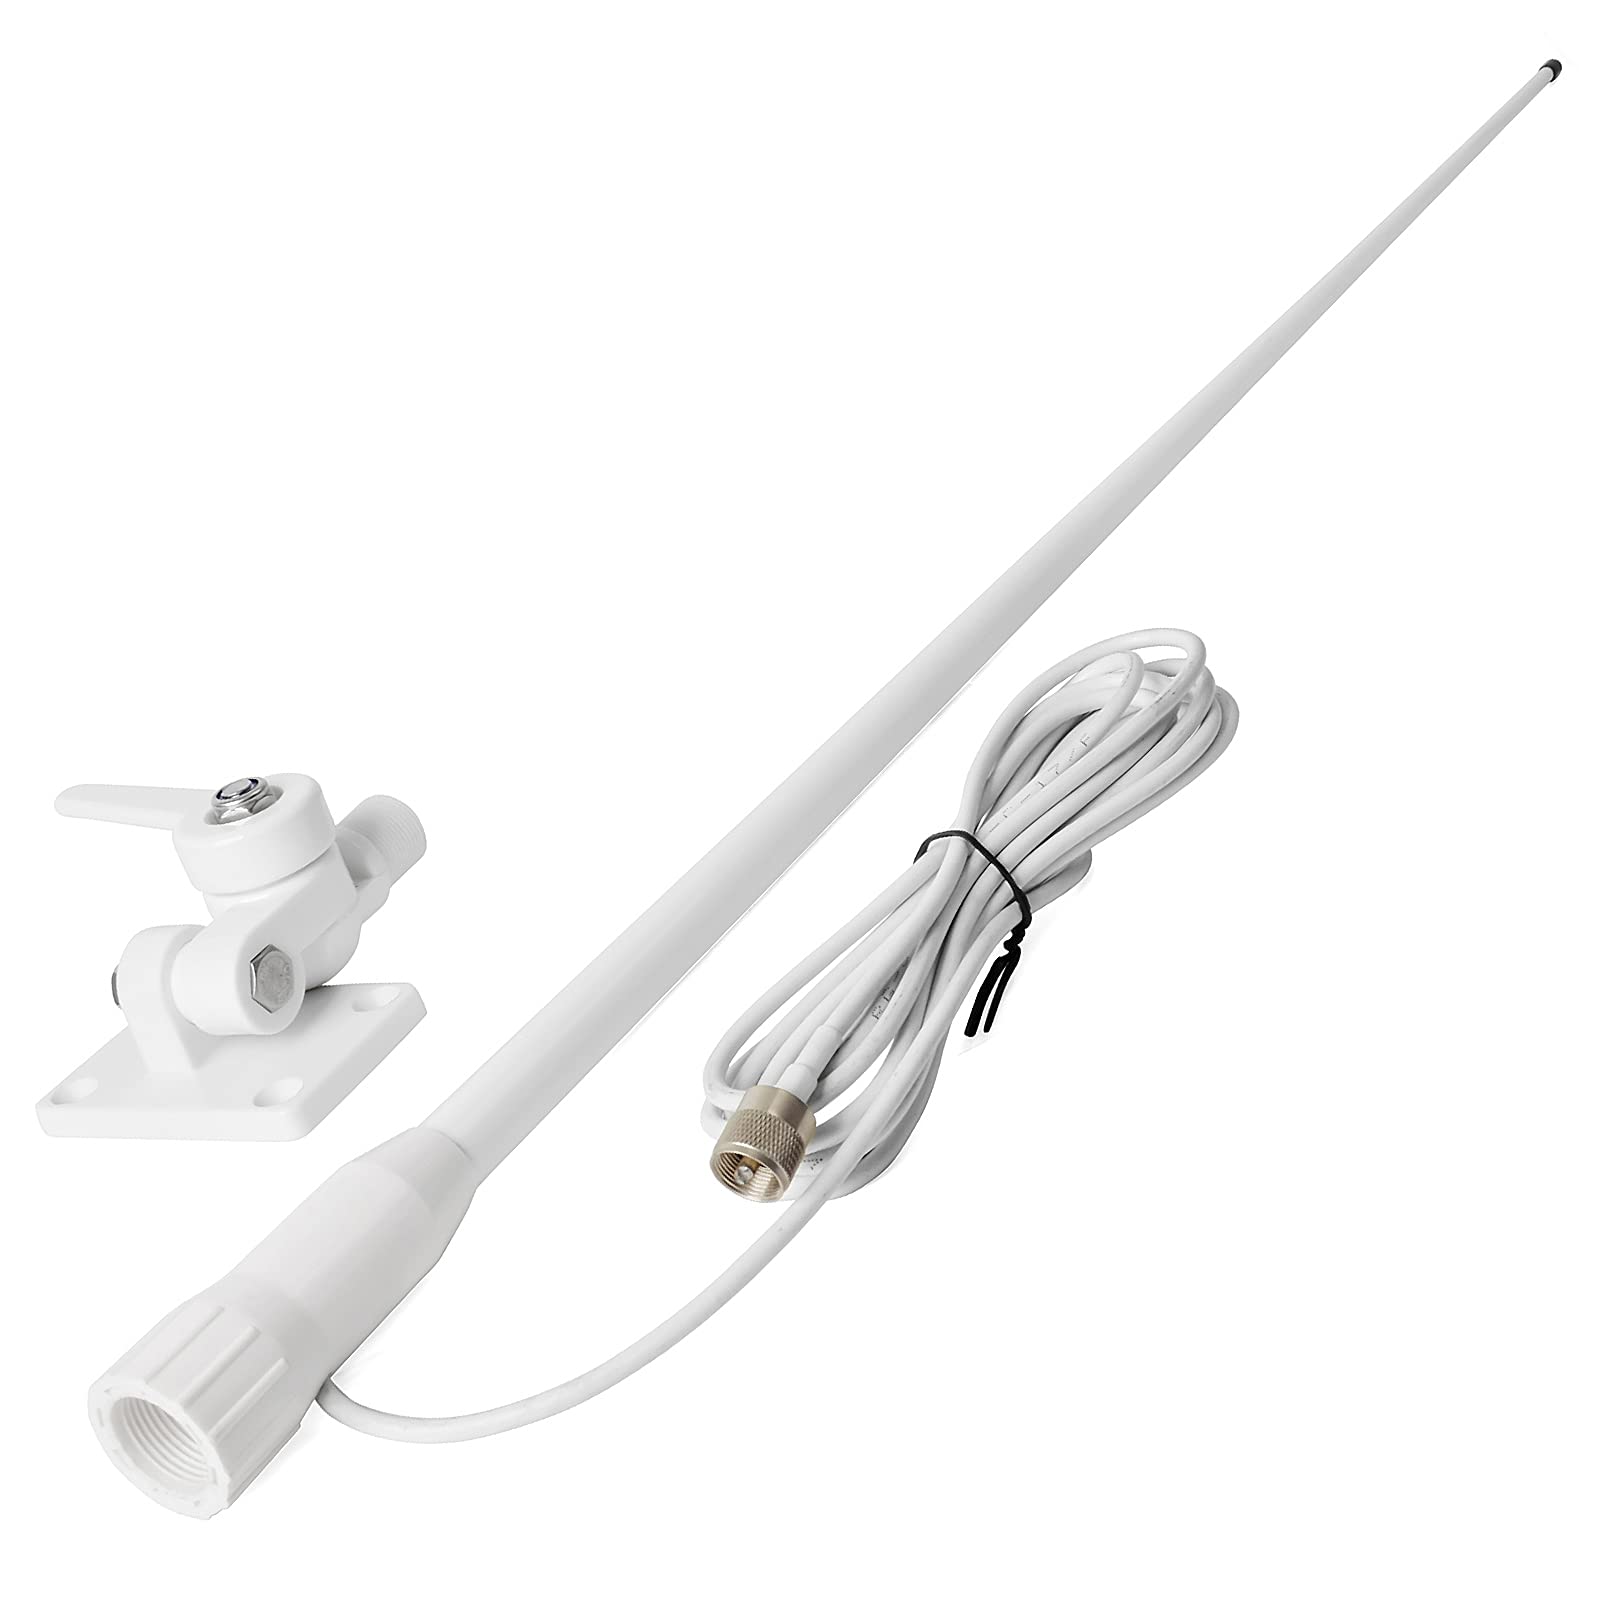 HYS VHF Marine Antenna Waterproof 3DBI 43.3inch Fiberglass Antennas  W/22.9ft(7m) RG58 Low Loss Premium Coaxial Cable with PL259/ Built-in to  Nylon Ratchet Mount